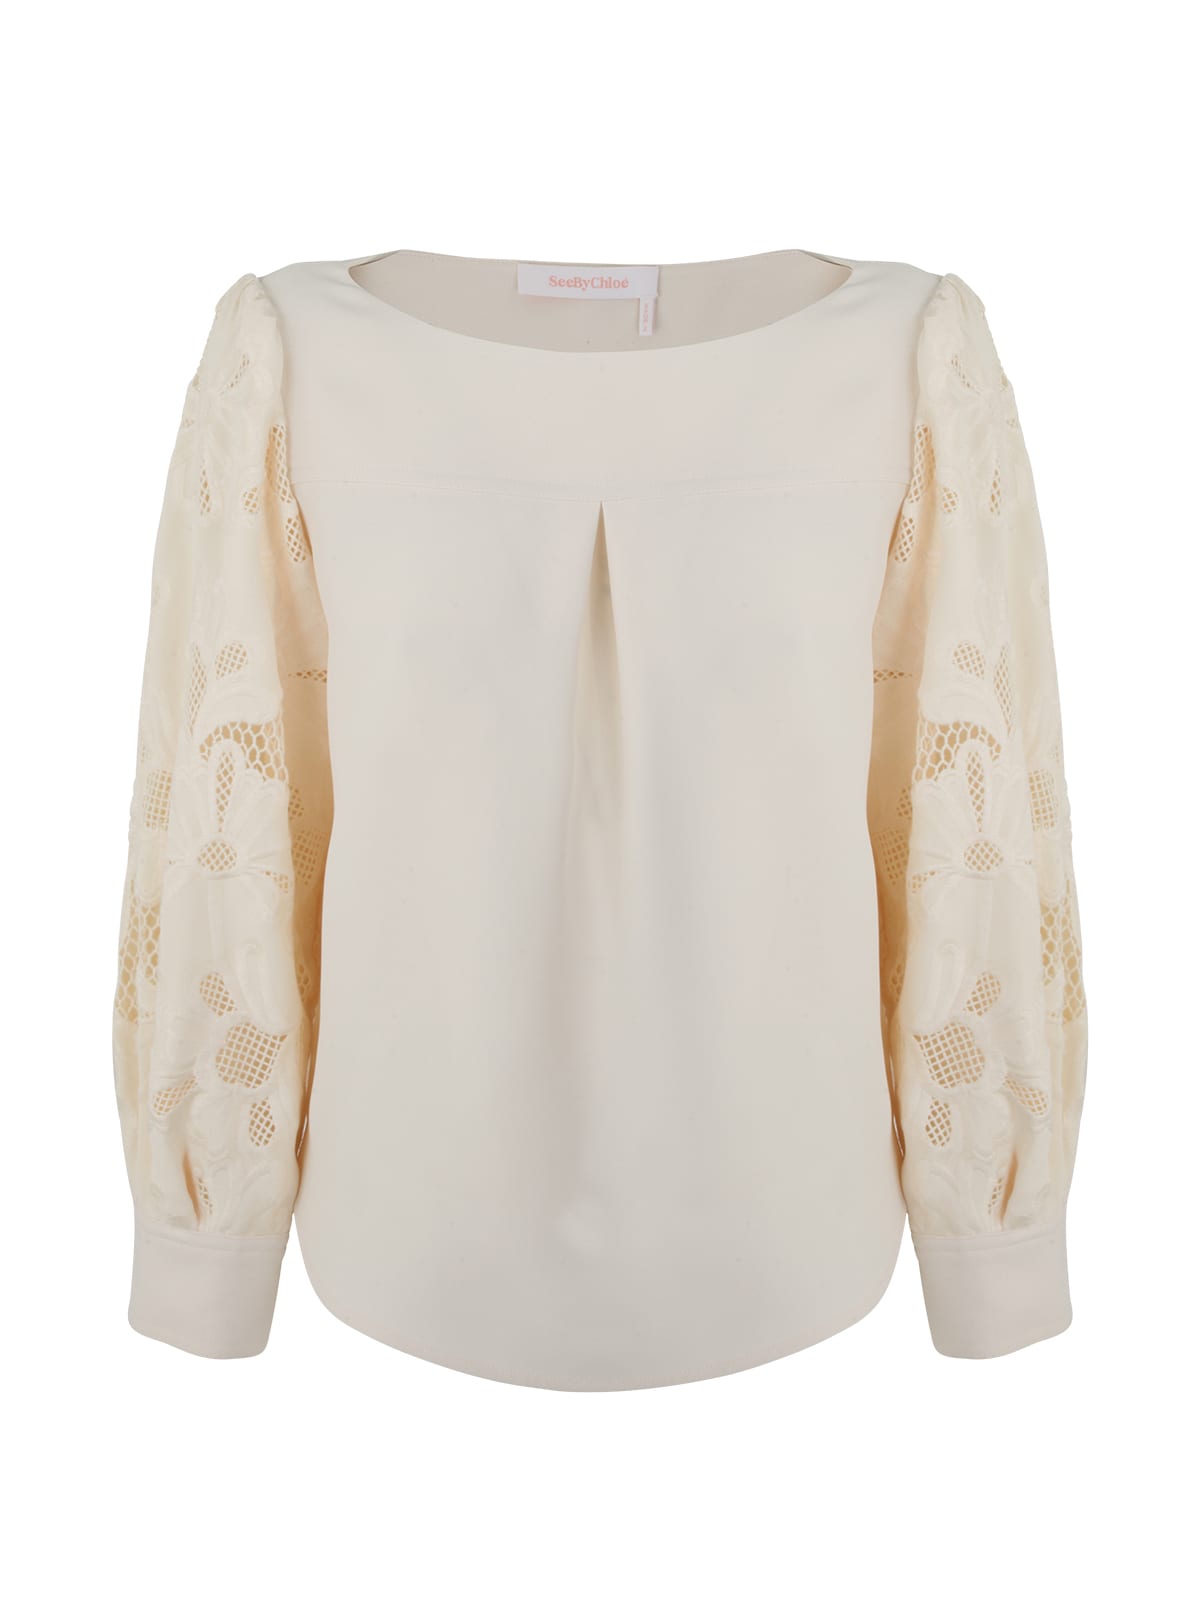 SEE BY CHLOÉ EMBROIDERED BLOUSE